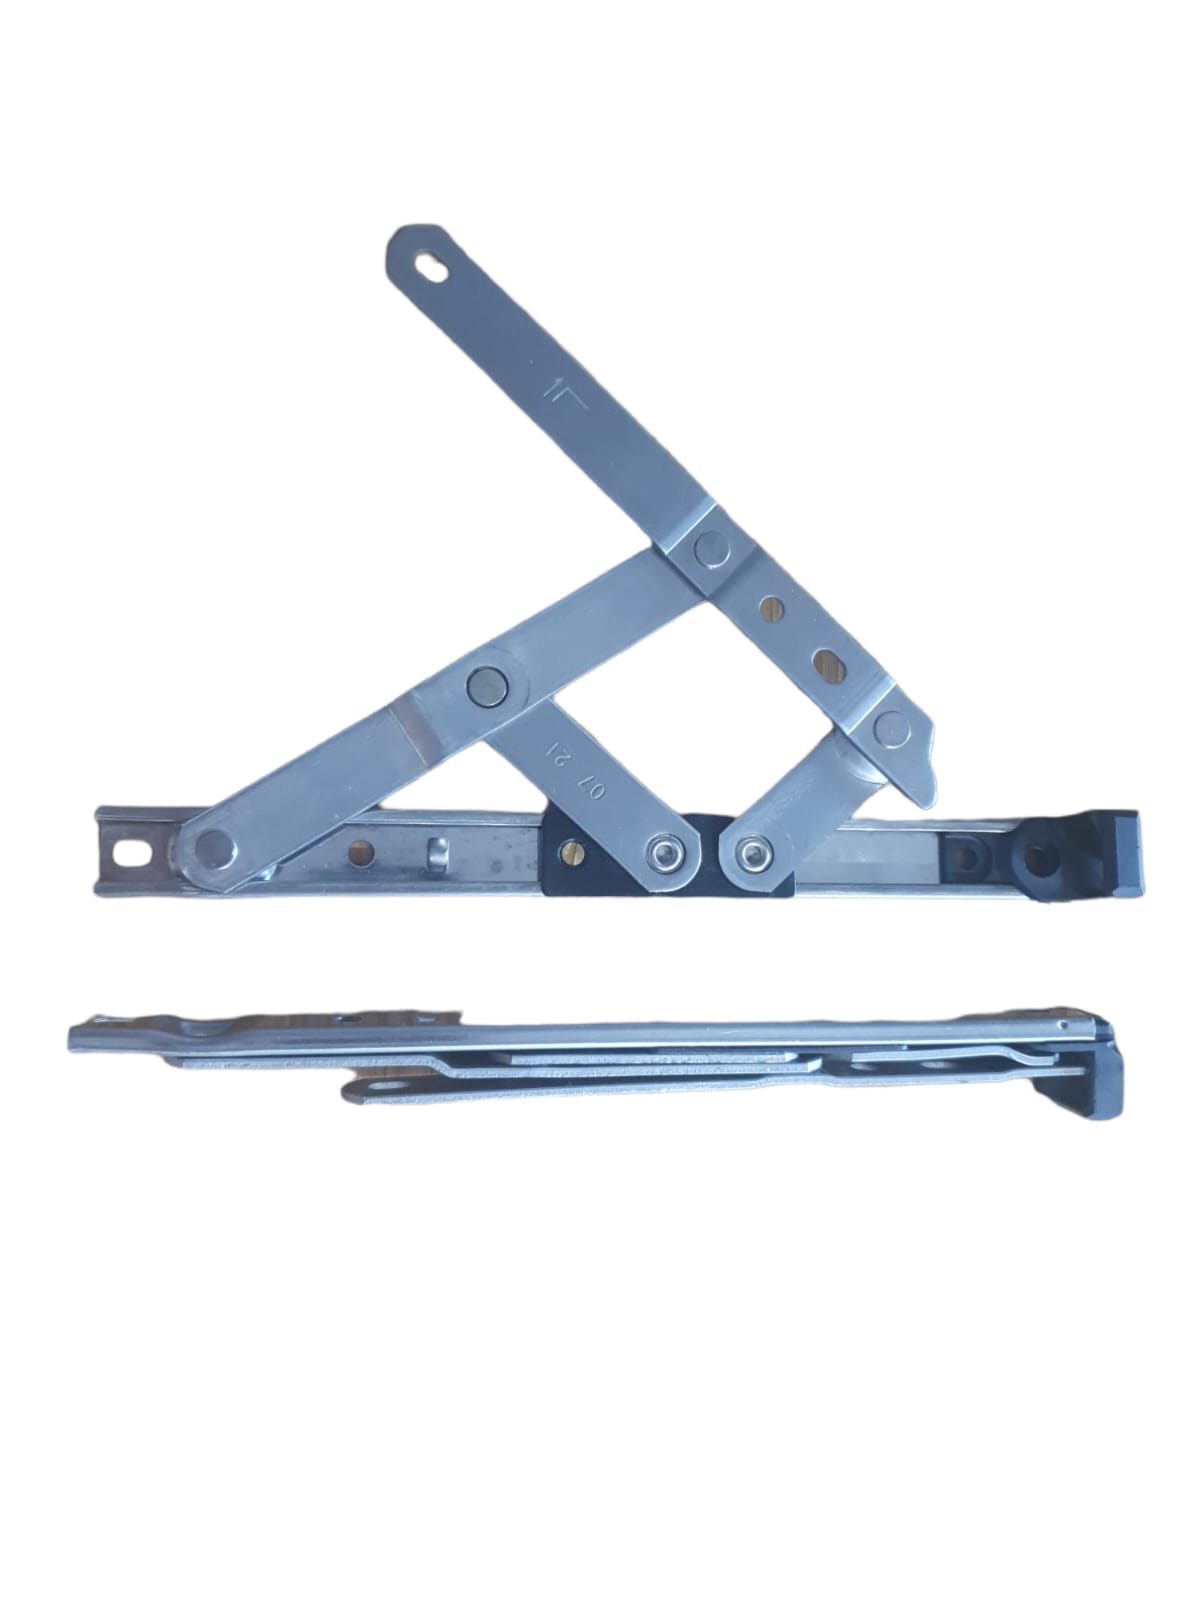 13-TRT8 1 x Pair 8" Top Hung Upvc Window Hinges Friction Stays 13mm Stack 